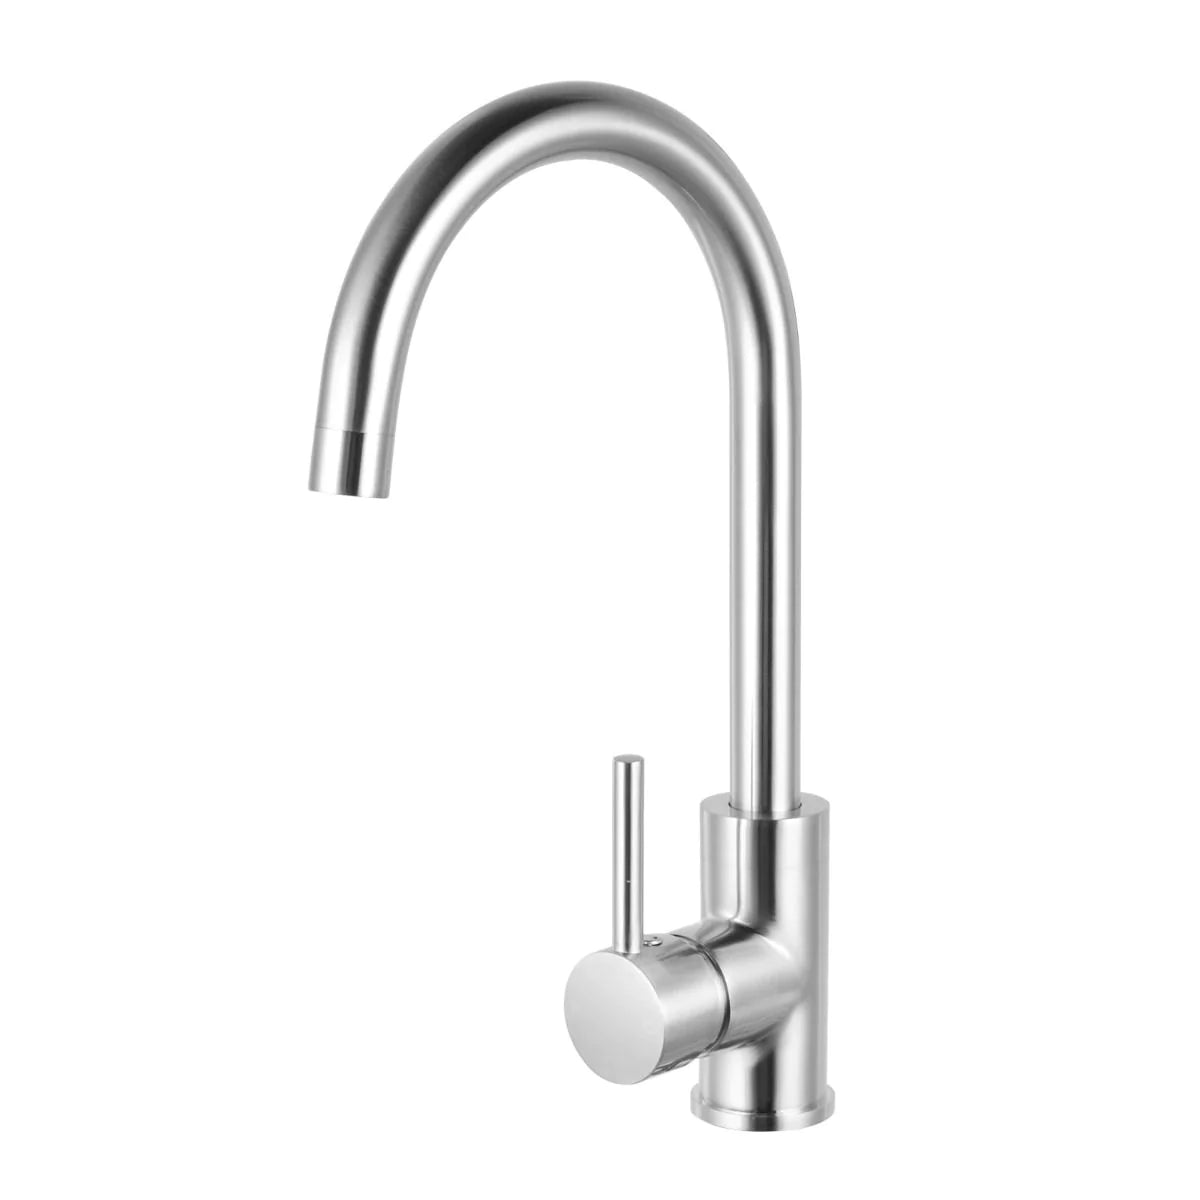 Round Standard Kitchen Sink Mixer Tap: Classic and practical addition to your kitchen setup-BU1026.KM